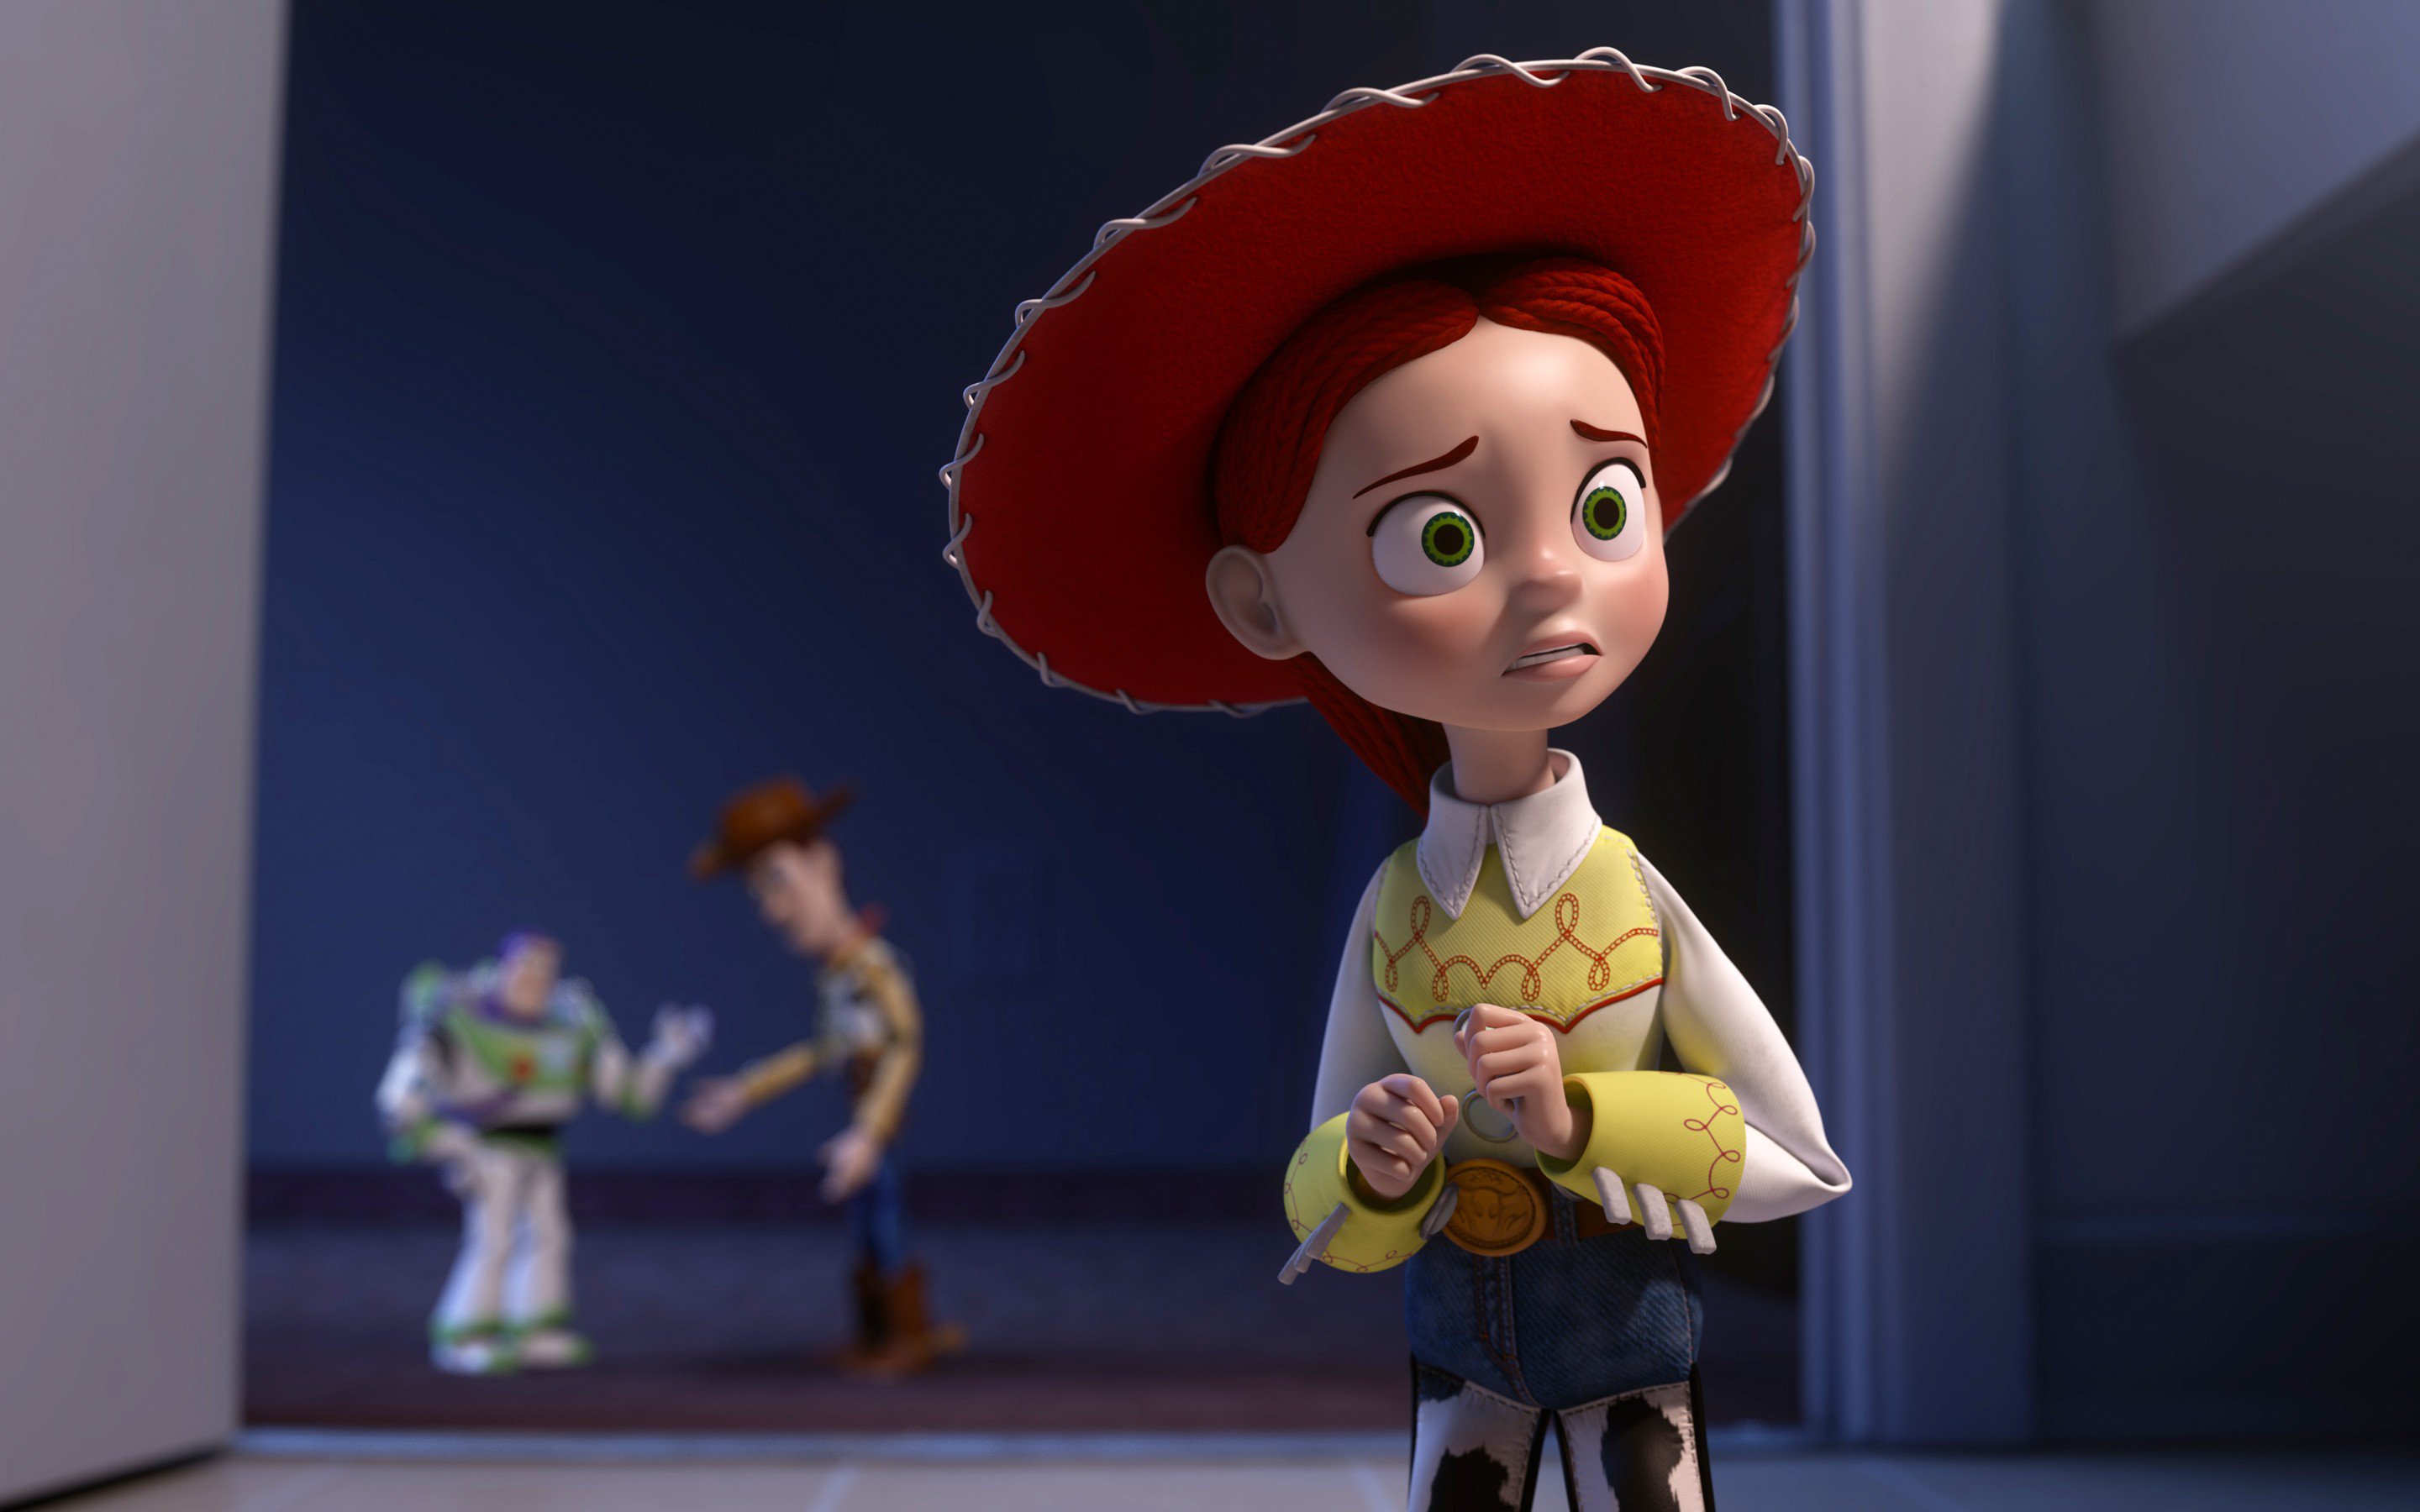 Wallpapers movies Toy Story animated movies on the desktop